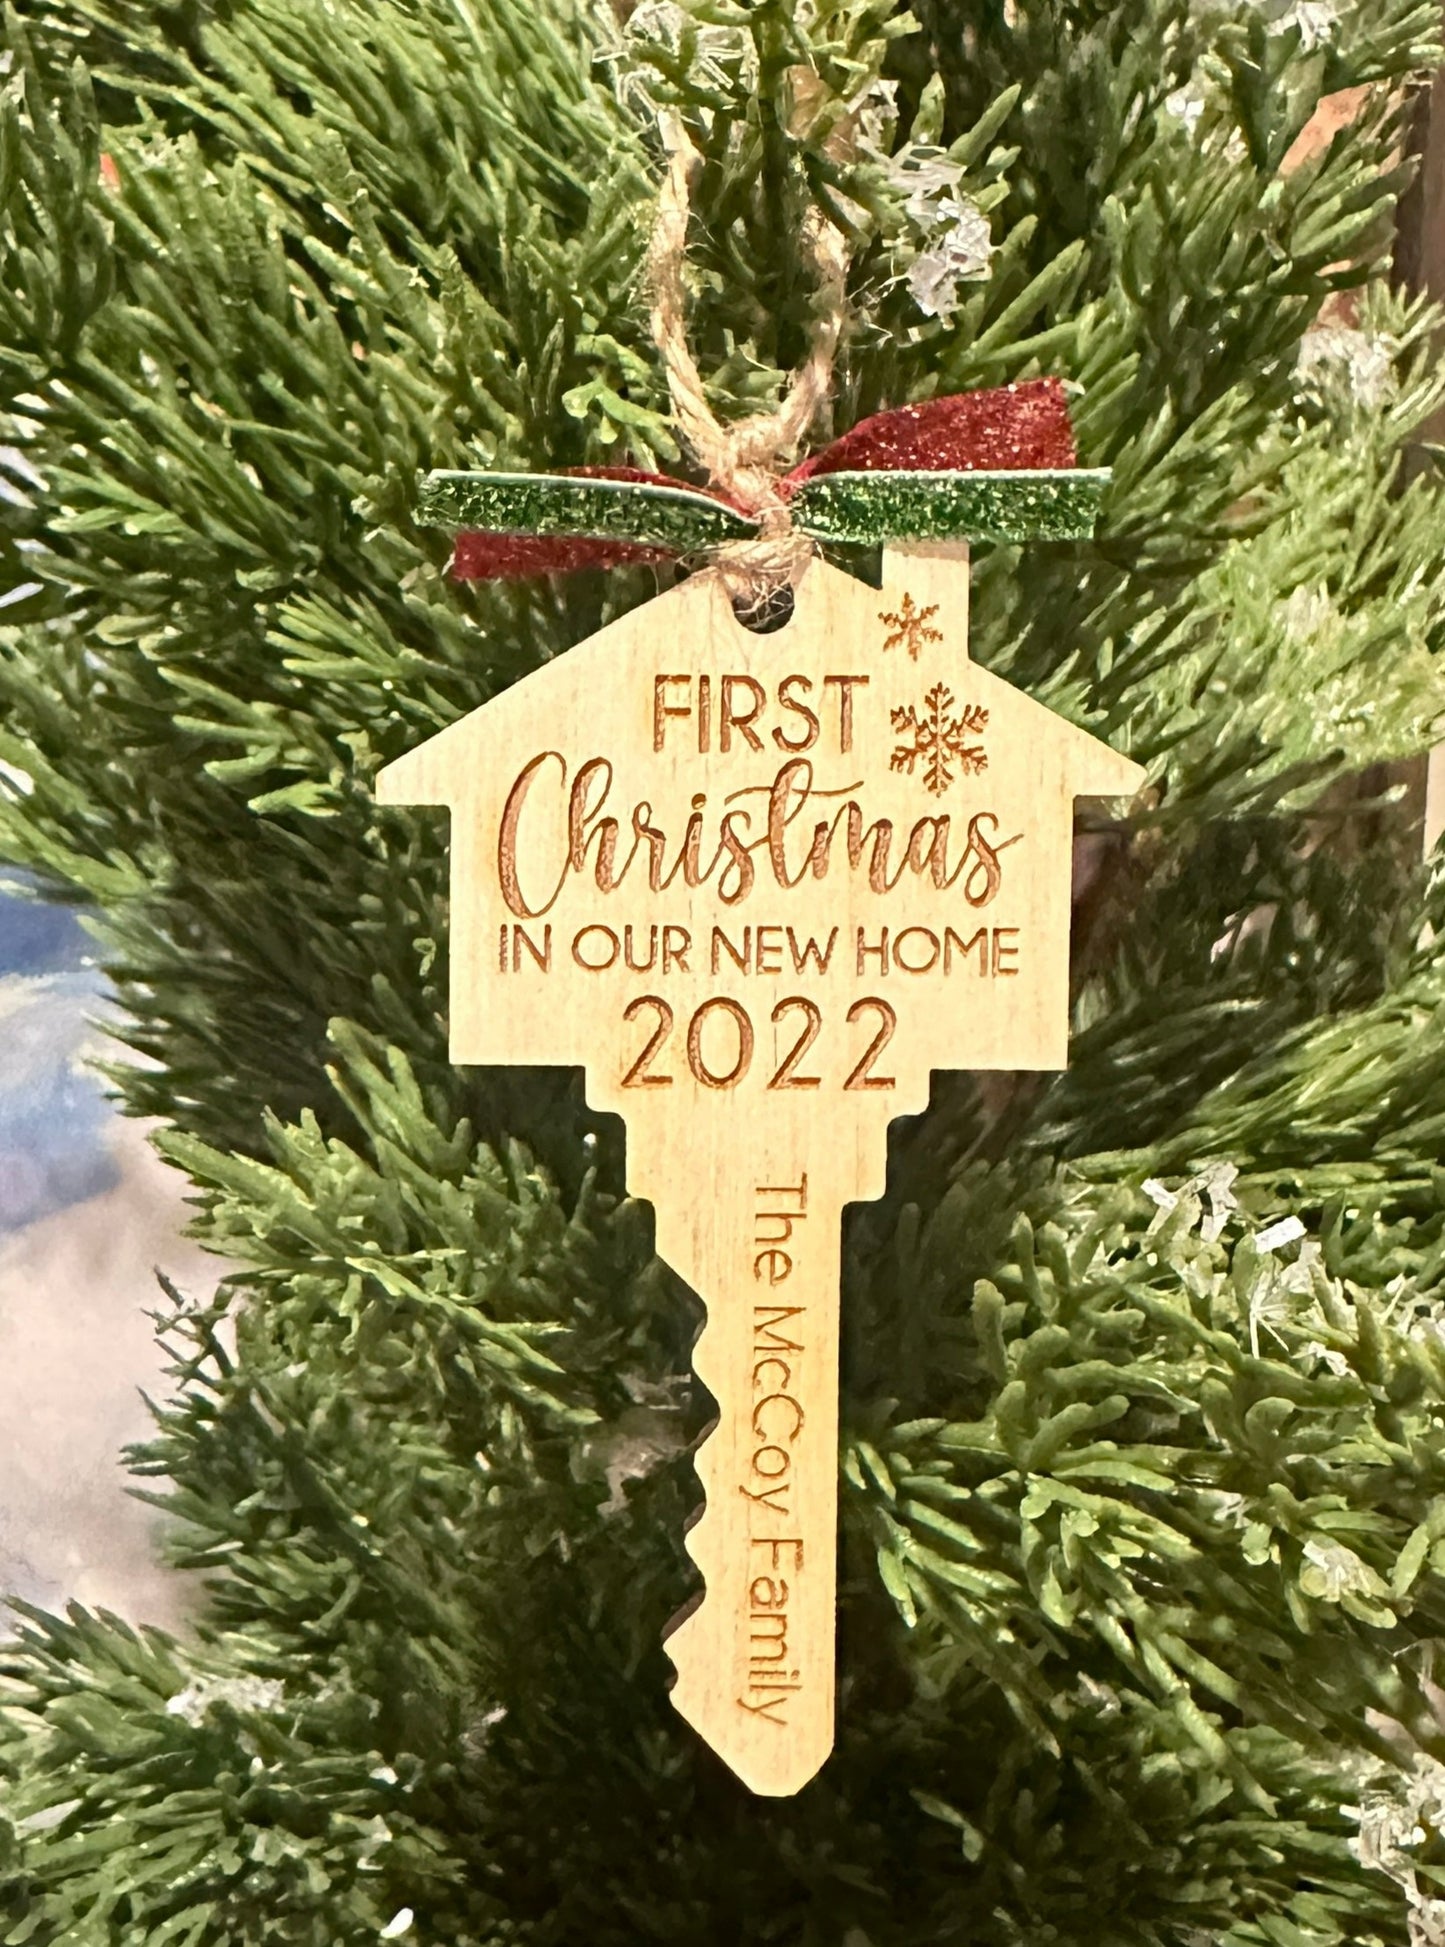 New Home Personalized Ornaments | First Christmas in New Home Ornament | Wooden Christmas Ornament | Farmhouse Christmas Ornament